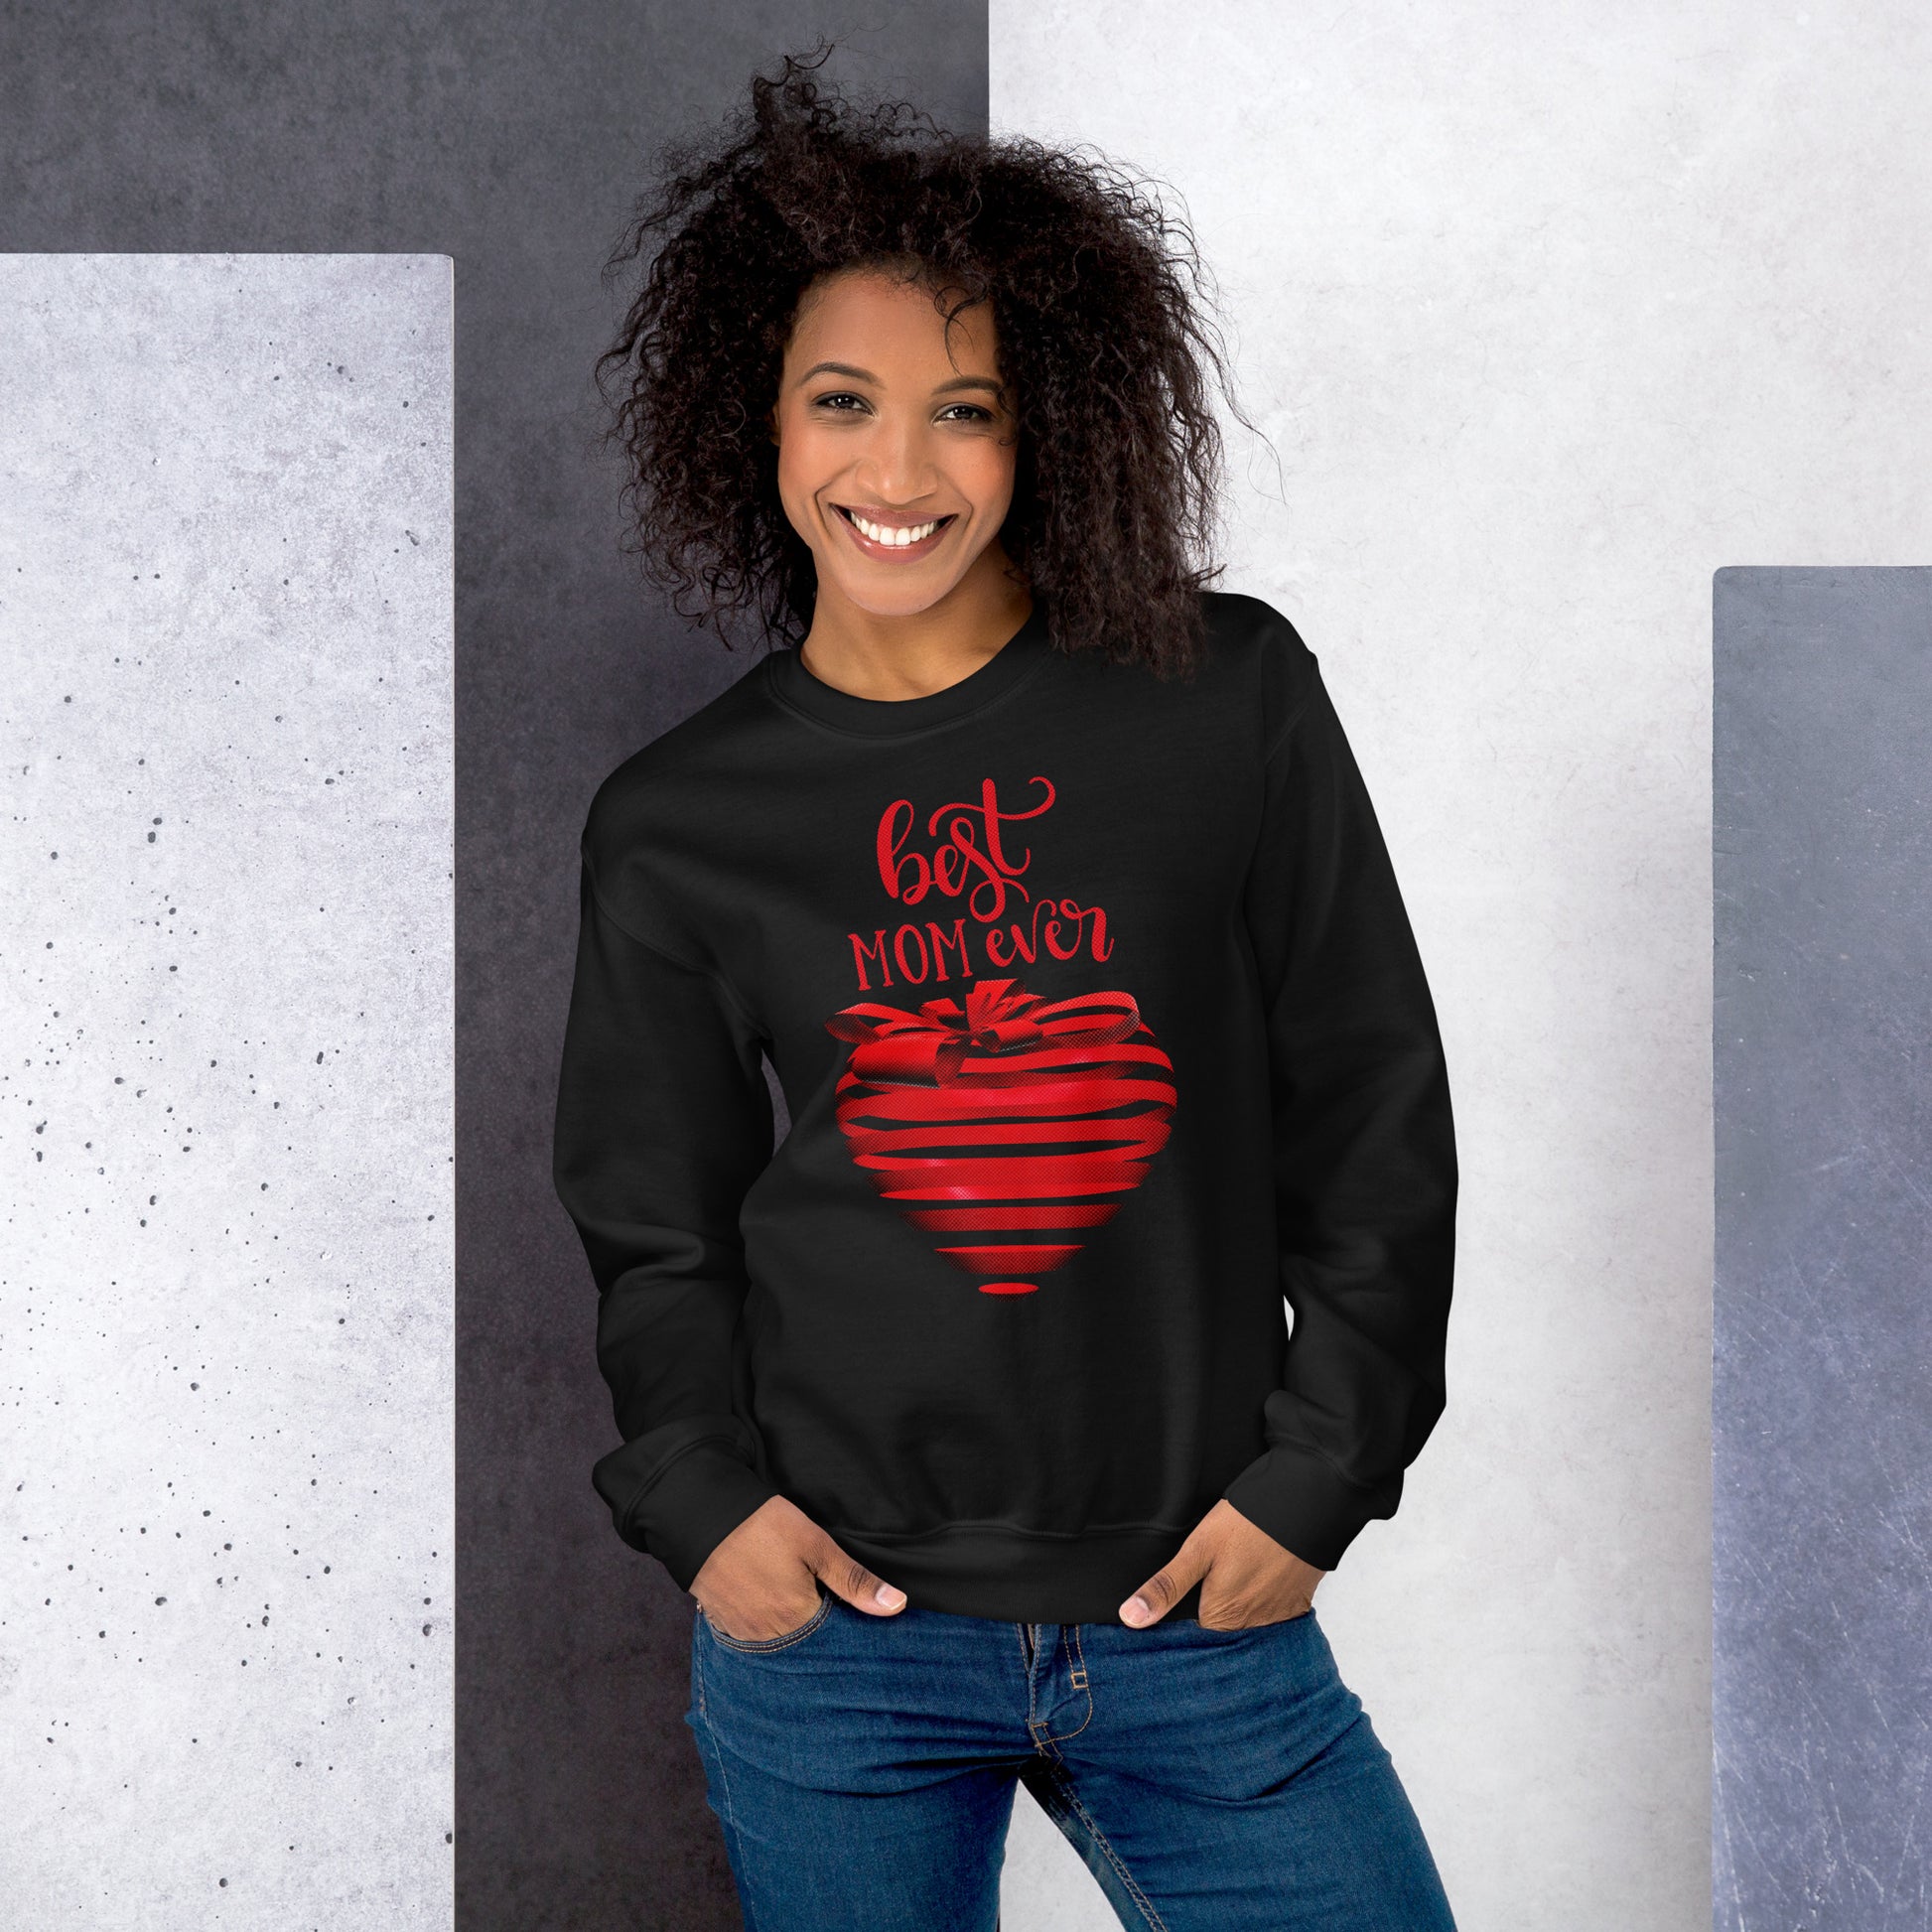 Women with black sweater with red text best MOM Ever and red heart